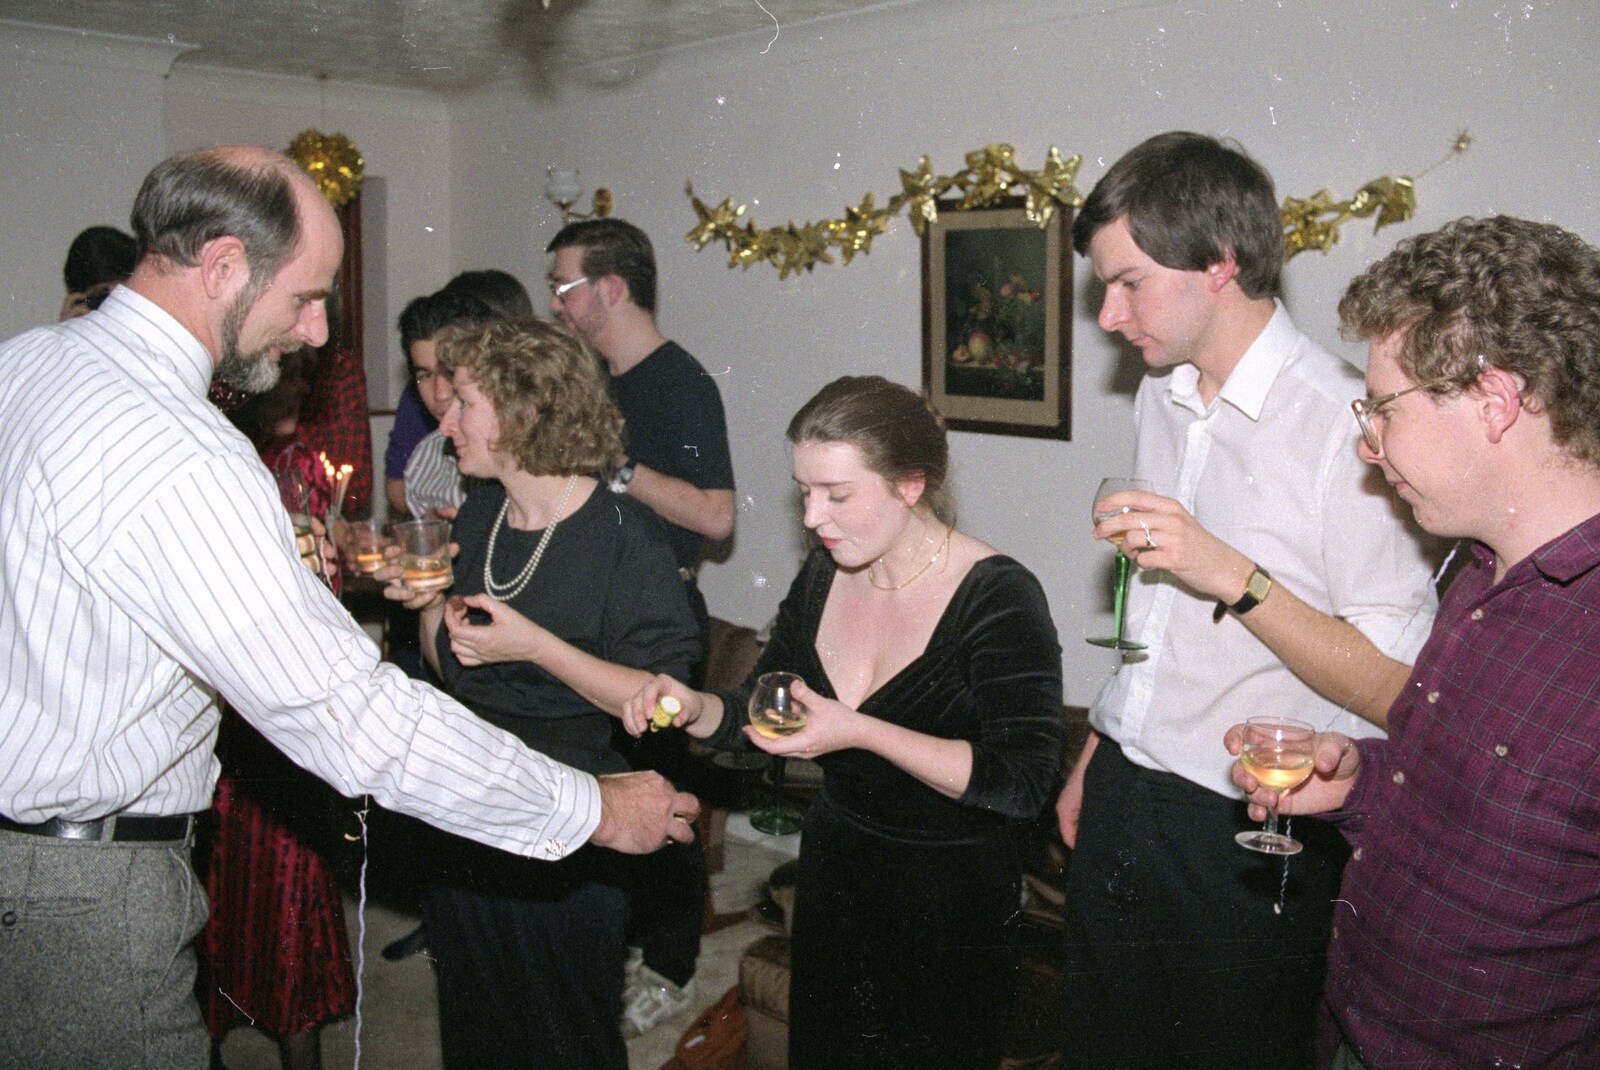 Something is handed out from New Year's Eve at Phil's, Hordle, Hampshire - 31st December 1990